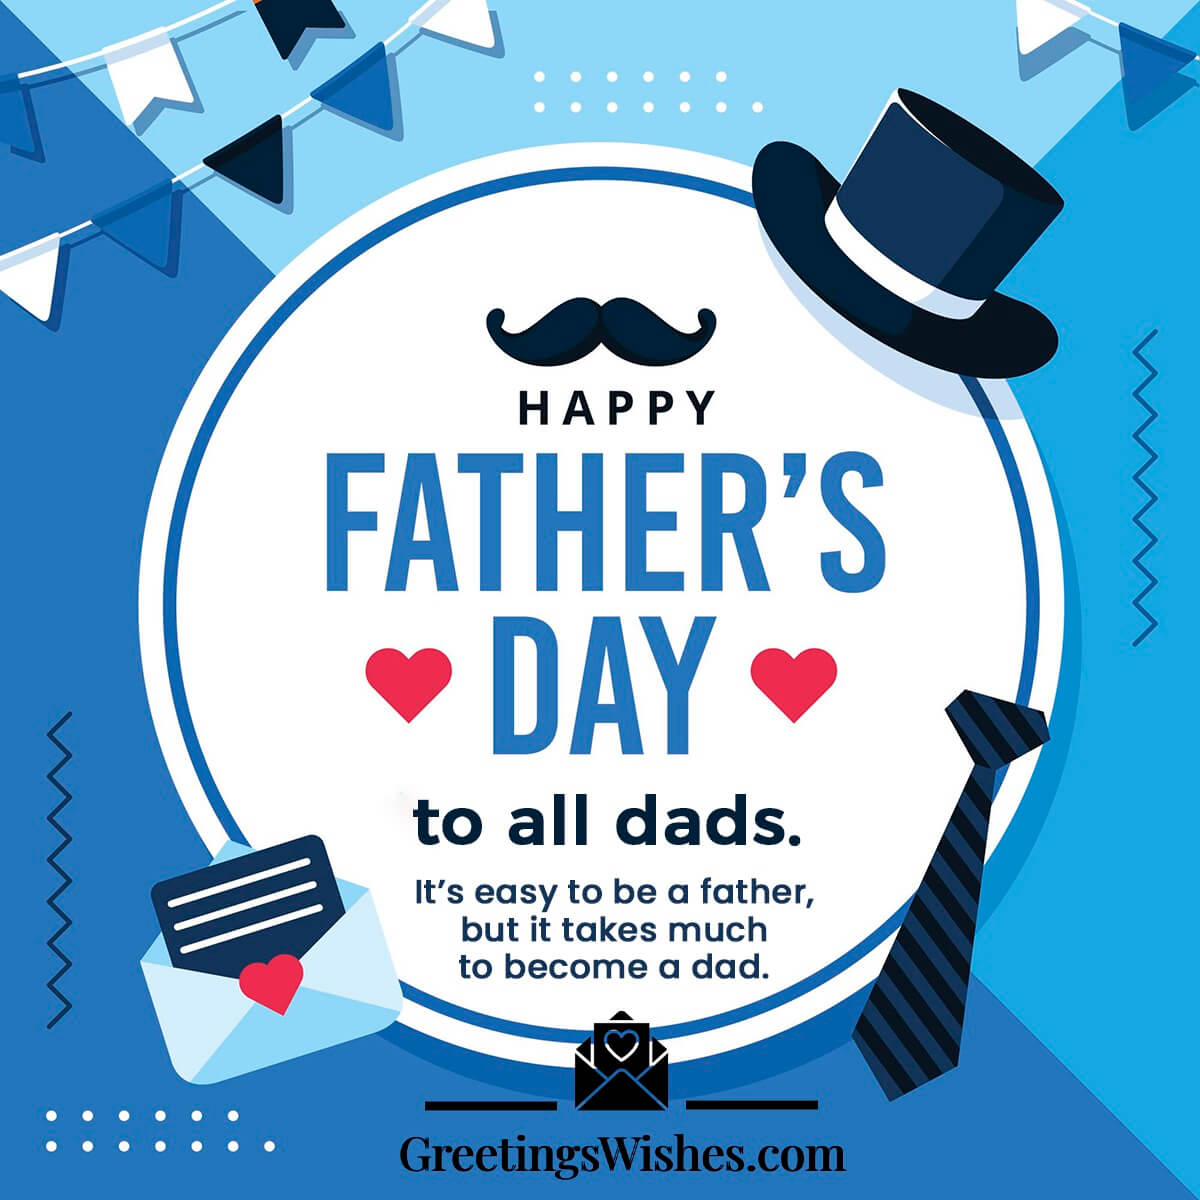 Happy Father’s Day Wishes Messages ( 18th June ) - Greetings Wishes